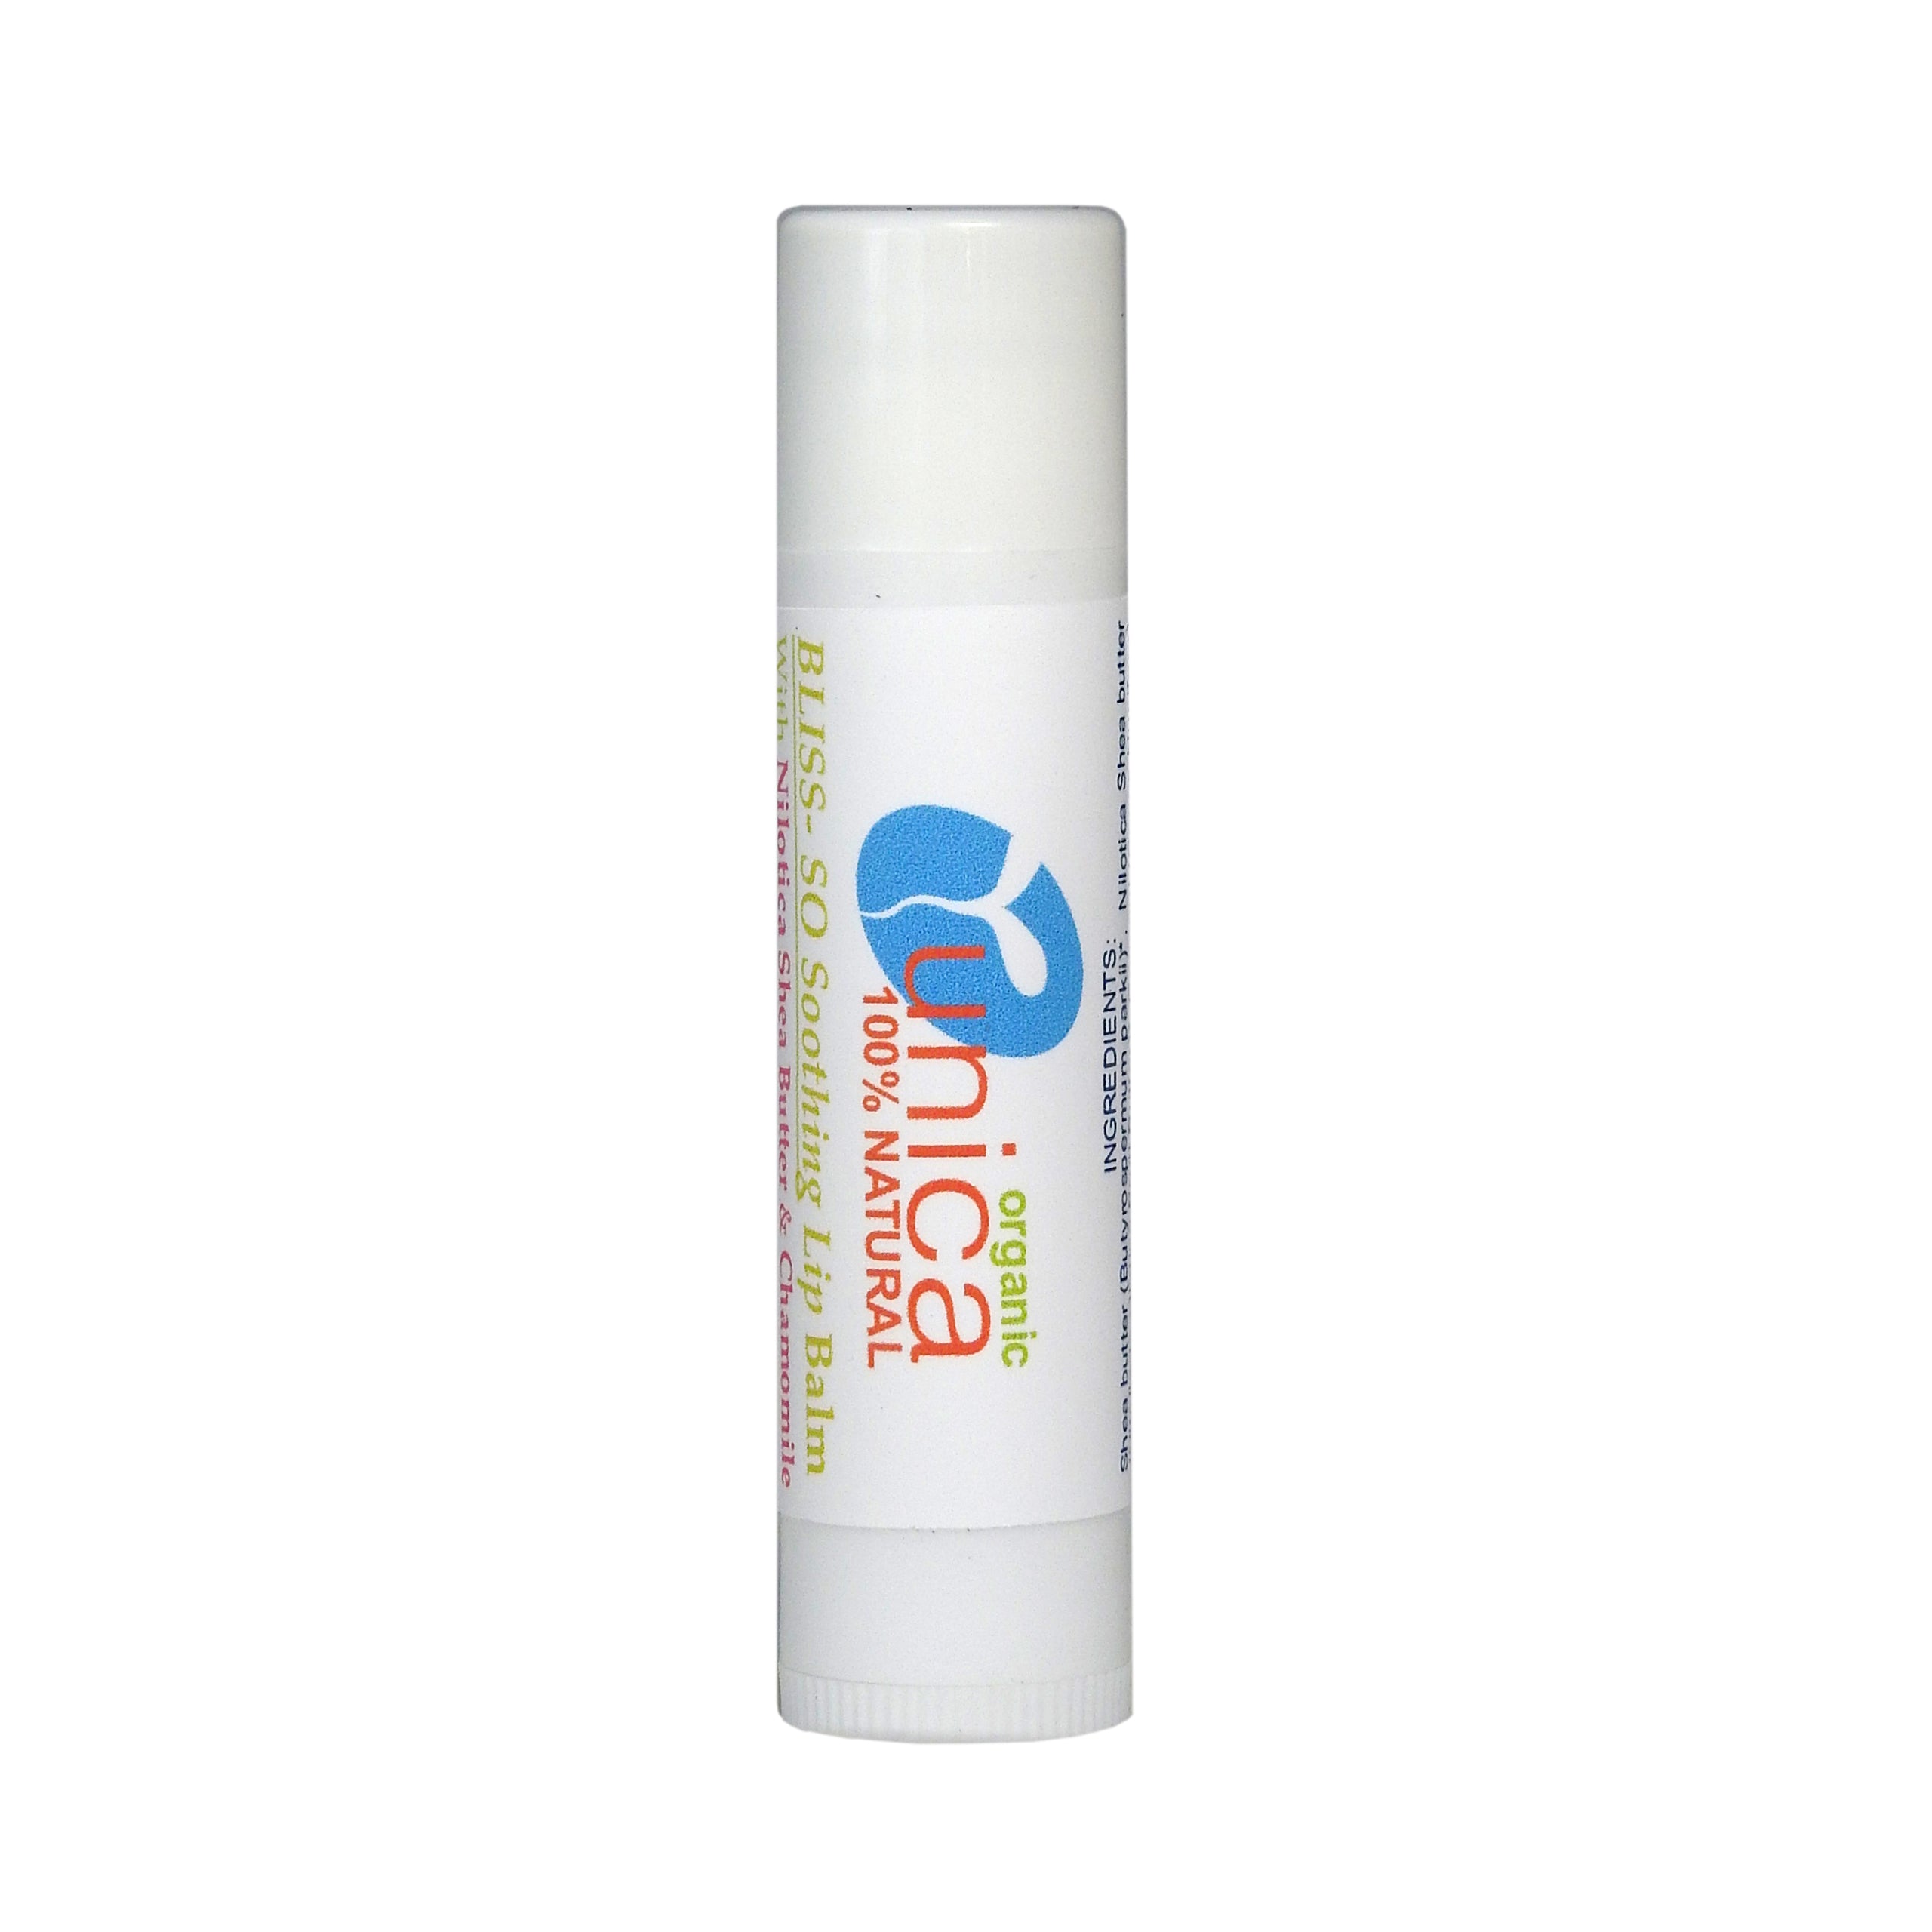 Tube of organic lip balm with blue chamomile and shea butter. For sensitive skin and eczema.